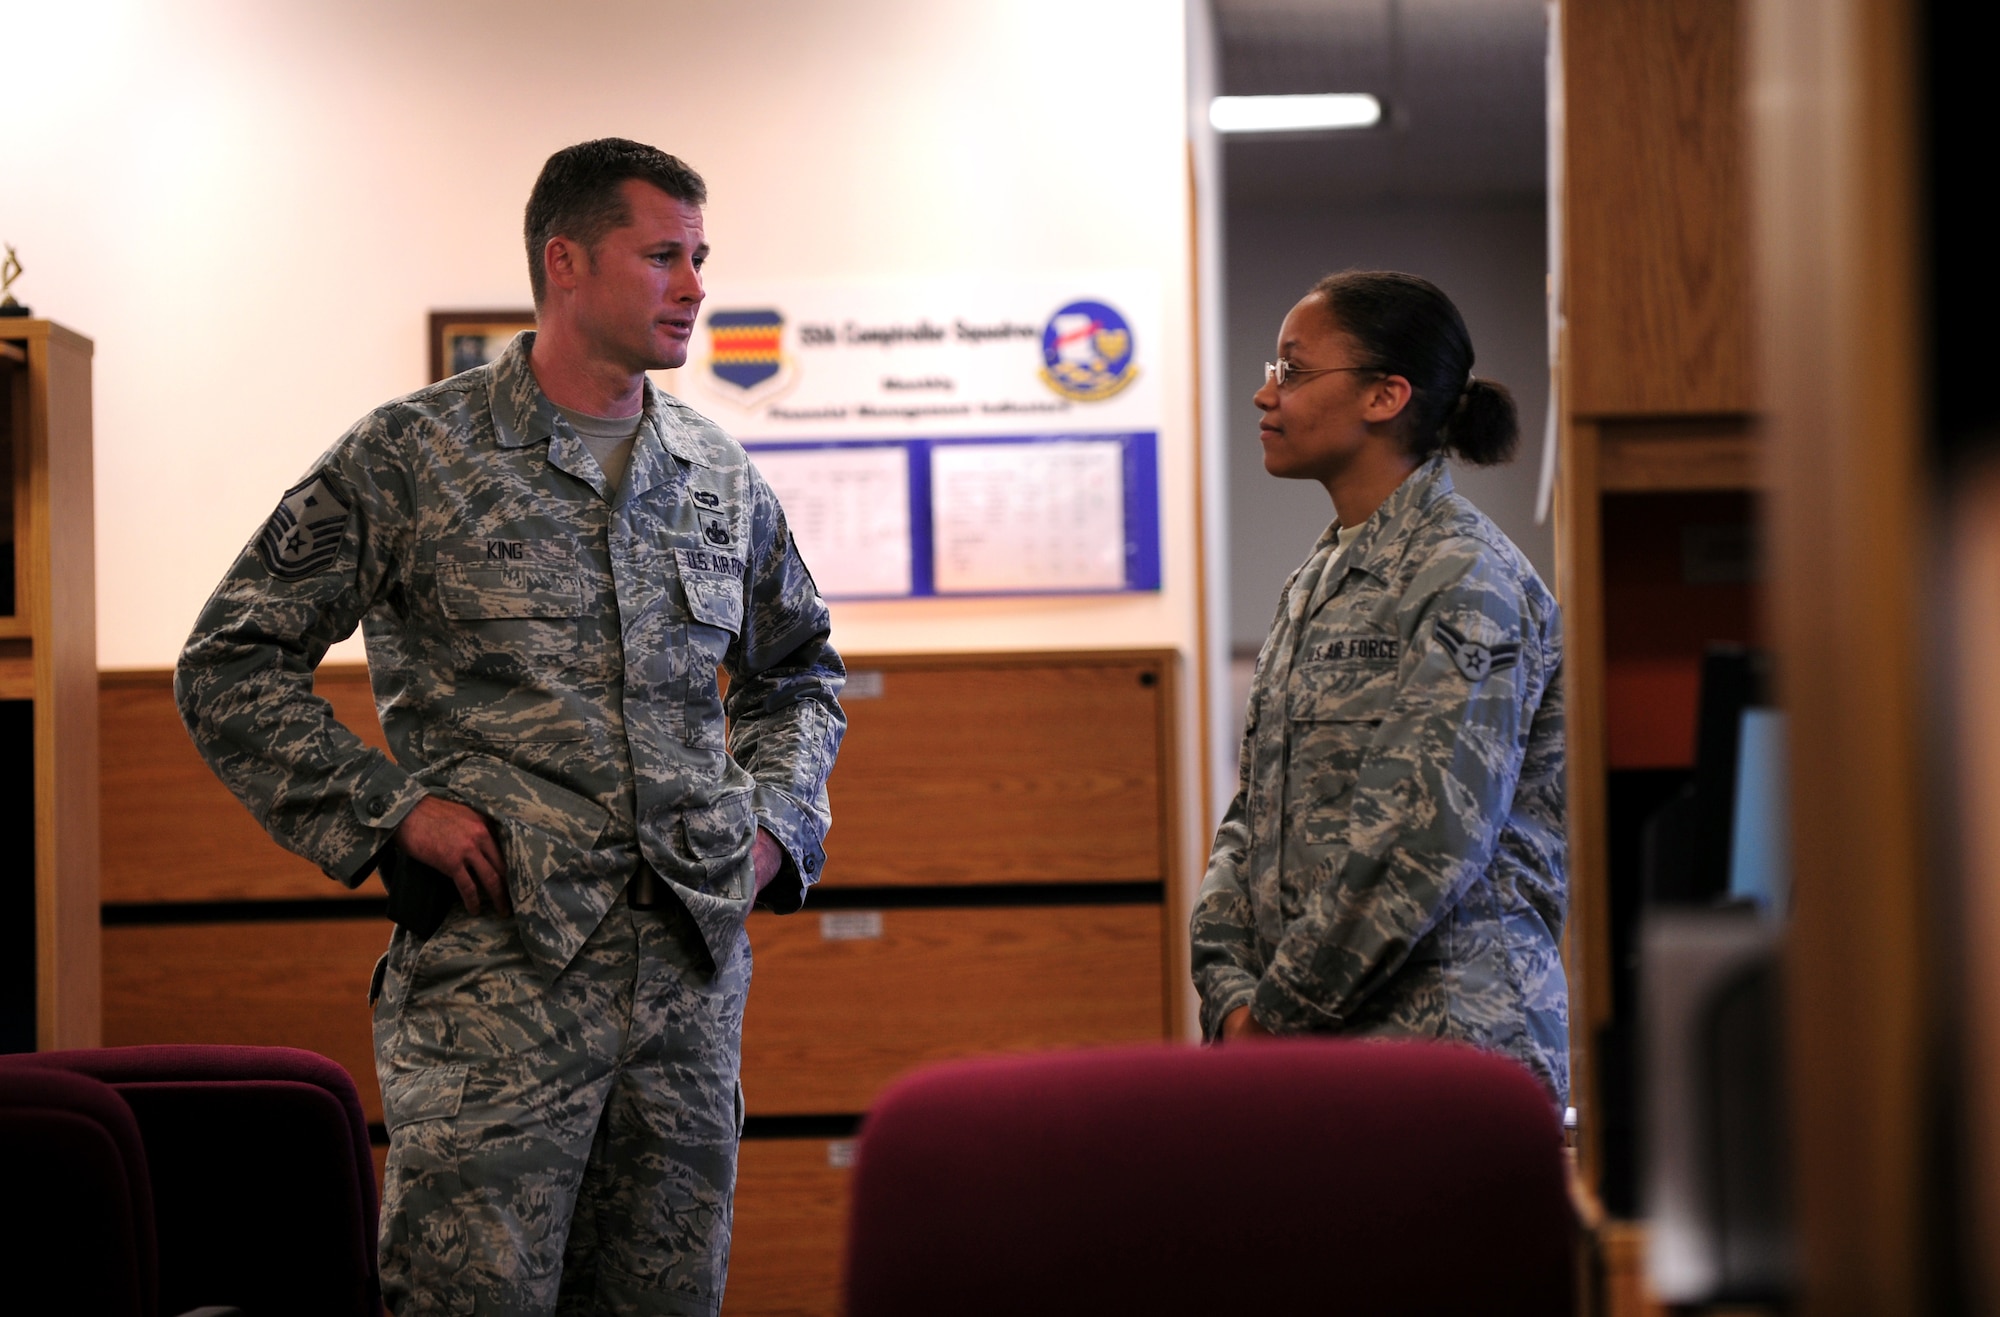 OFFUTT AIR FORCE BASE, Neb. - Master Sgt. Justin King, first sergeant for the 55th Wing staff, meets with Airman 1st Class Desirae White, a customer service technician with the 55th Comptroller Squadron, as part of his daily rounds, Aug. 25. Sergeant King handles many administrative duties and administers corrective actions when necessary to members under the commander's authority. U.S. Air Force photo by Josh Plueger
